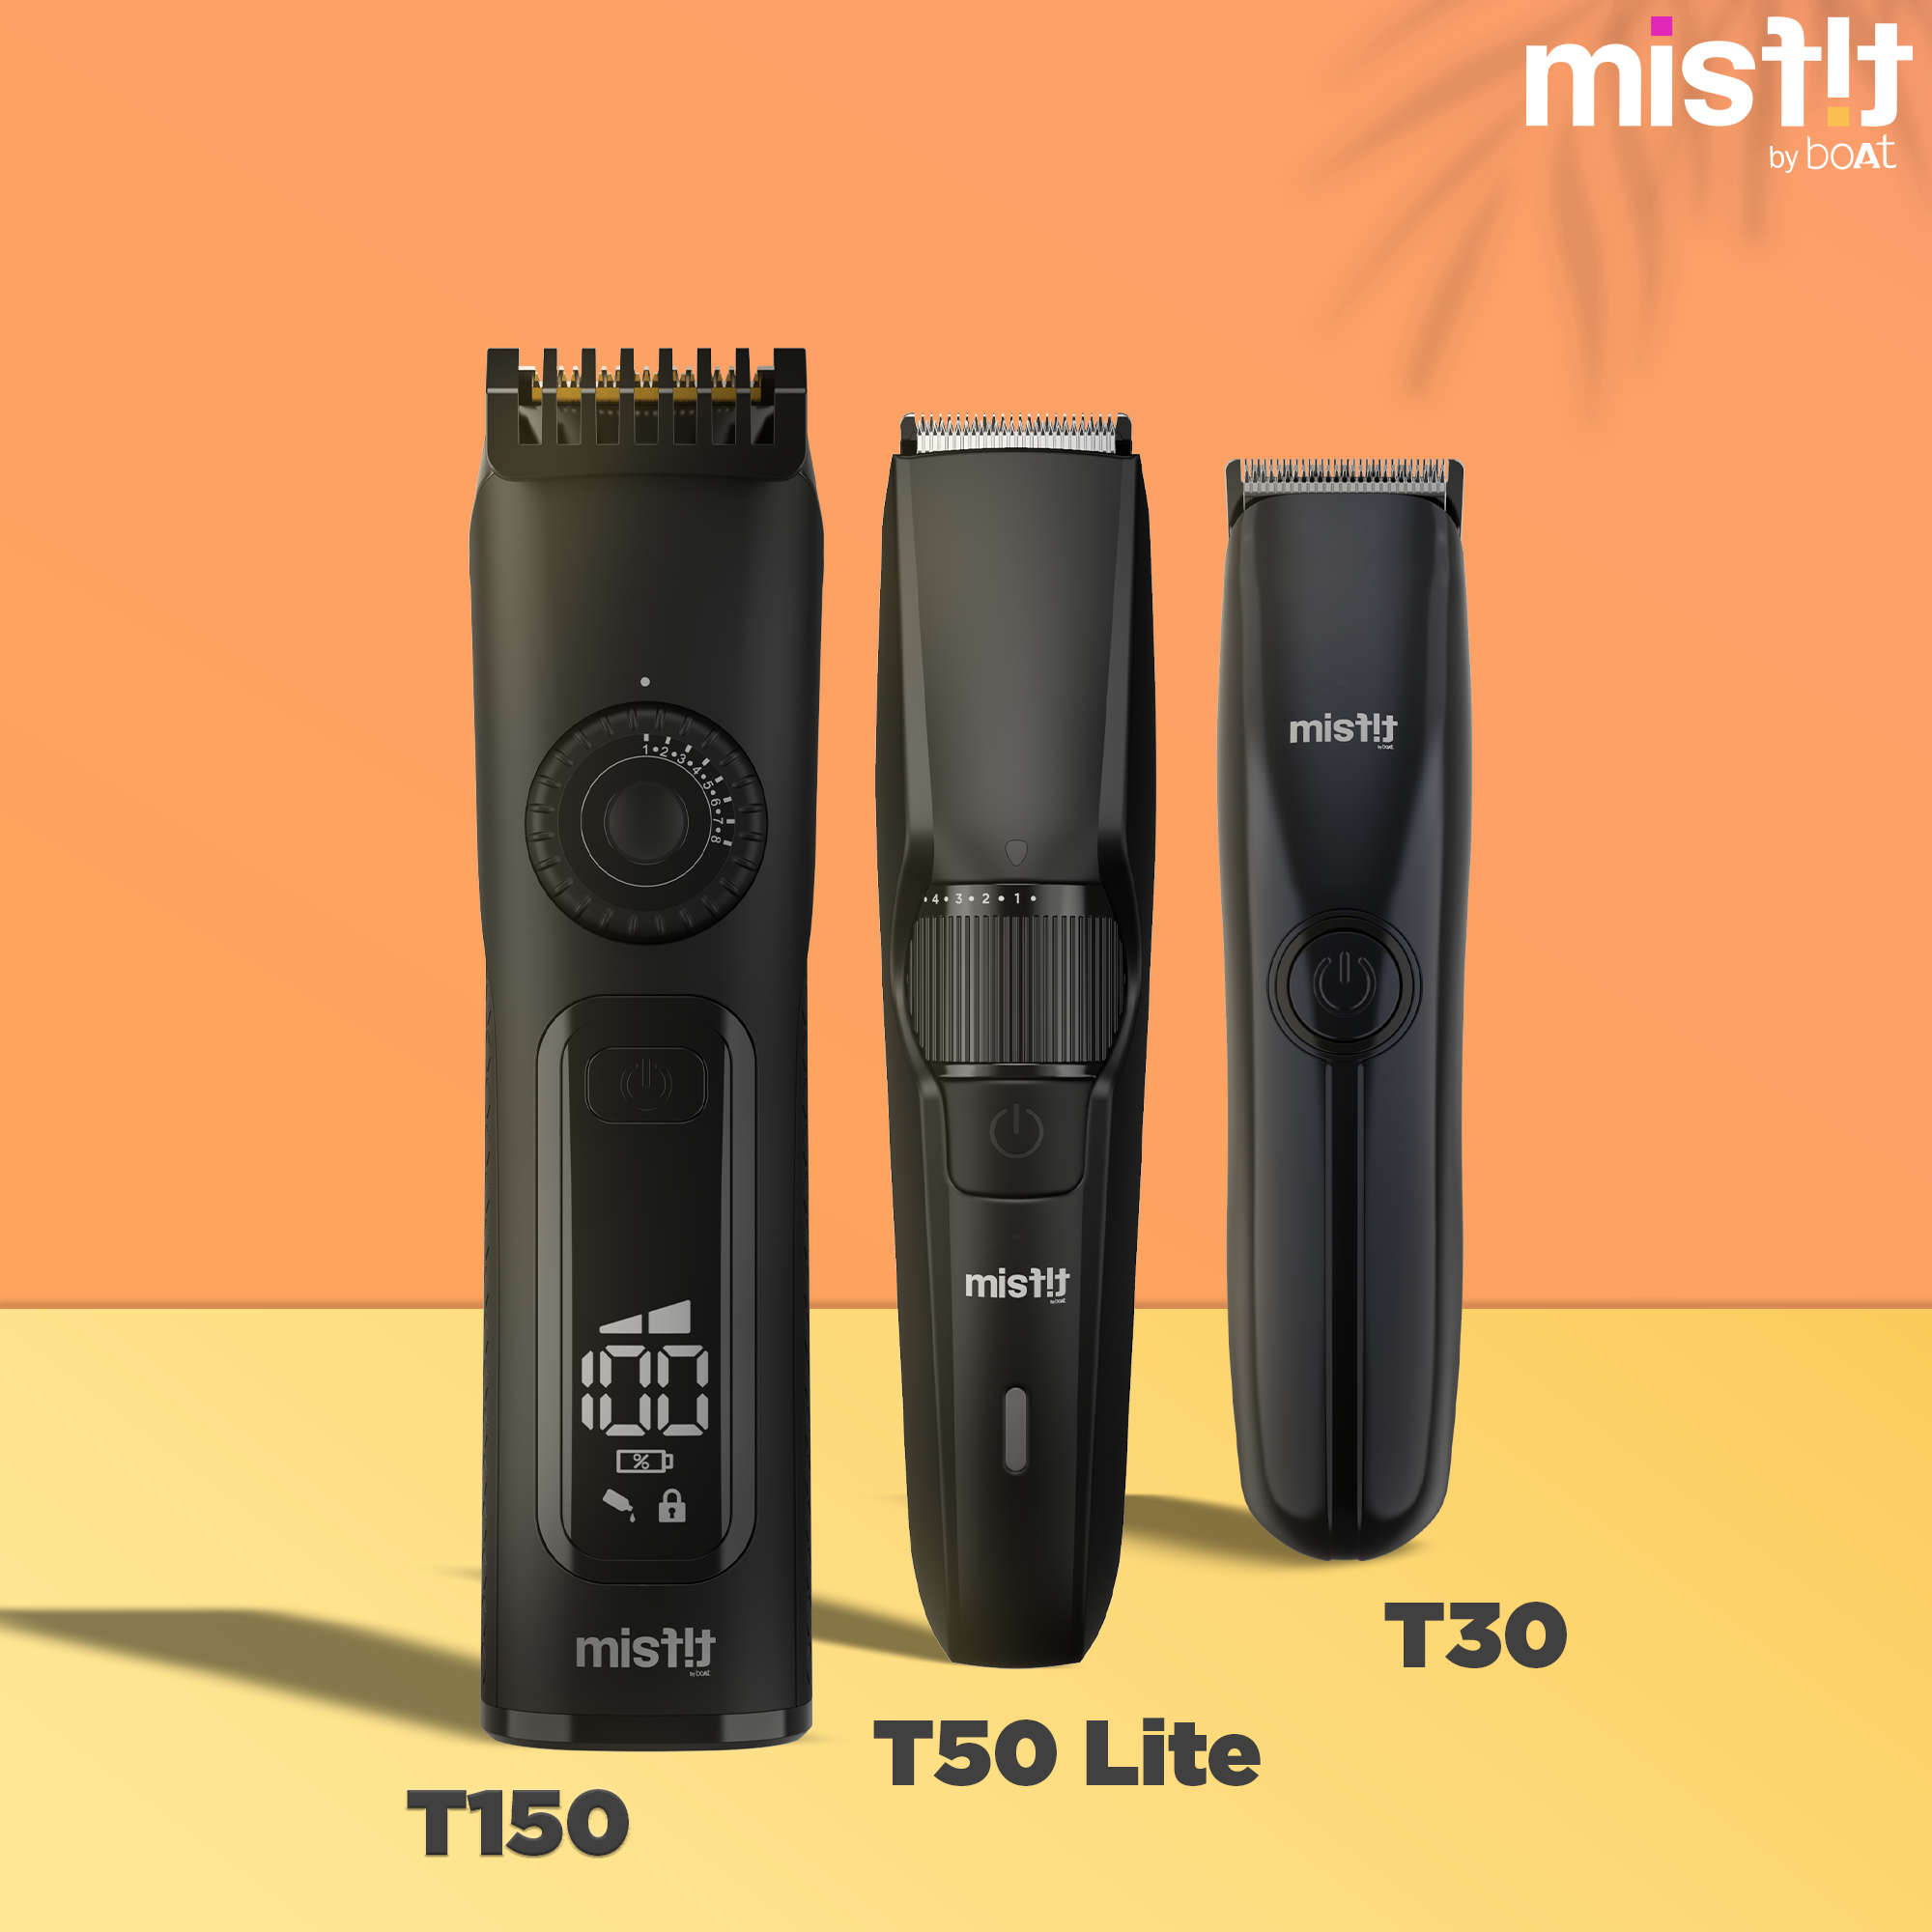 boAt launches their all-new Misfit T150, T50 Lite and T30 Trimmers-- Revolutionary, Smart Personal Groomers for Everyone